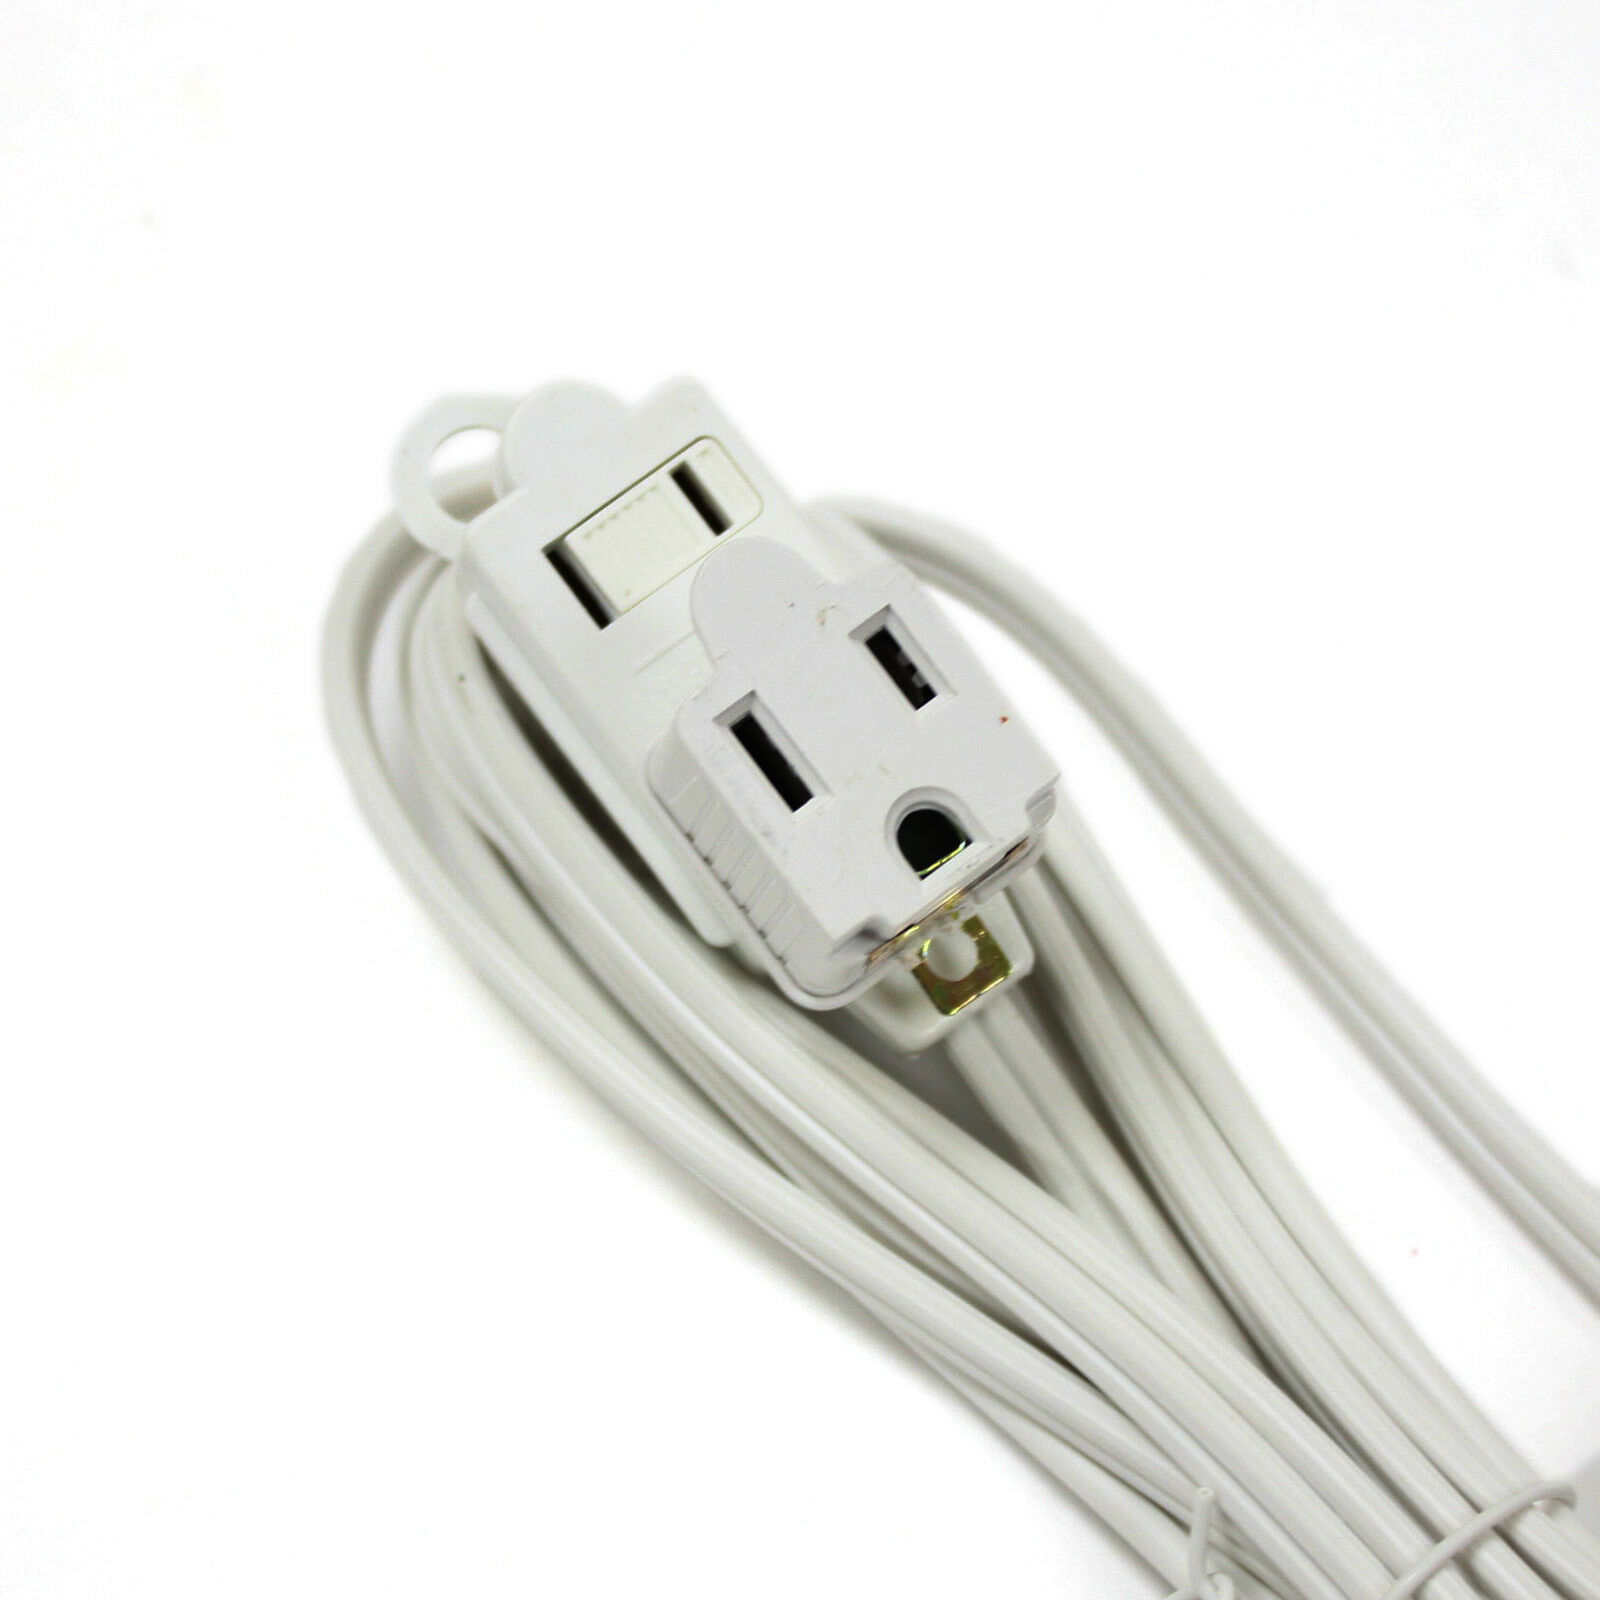 Are 2 Prong Extension Cords Safe?